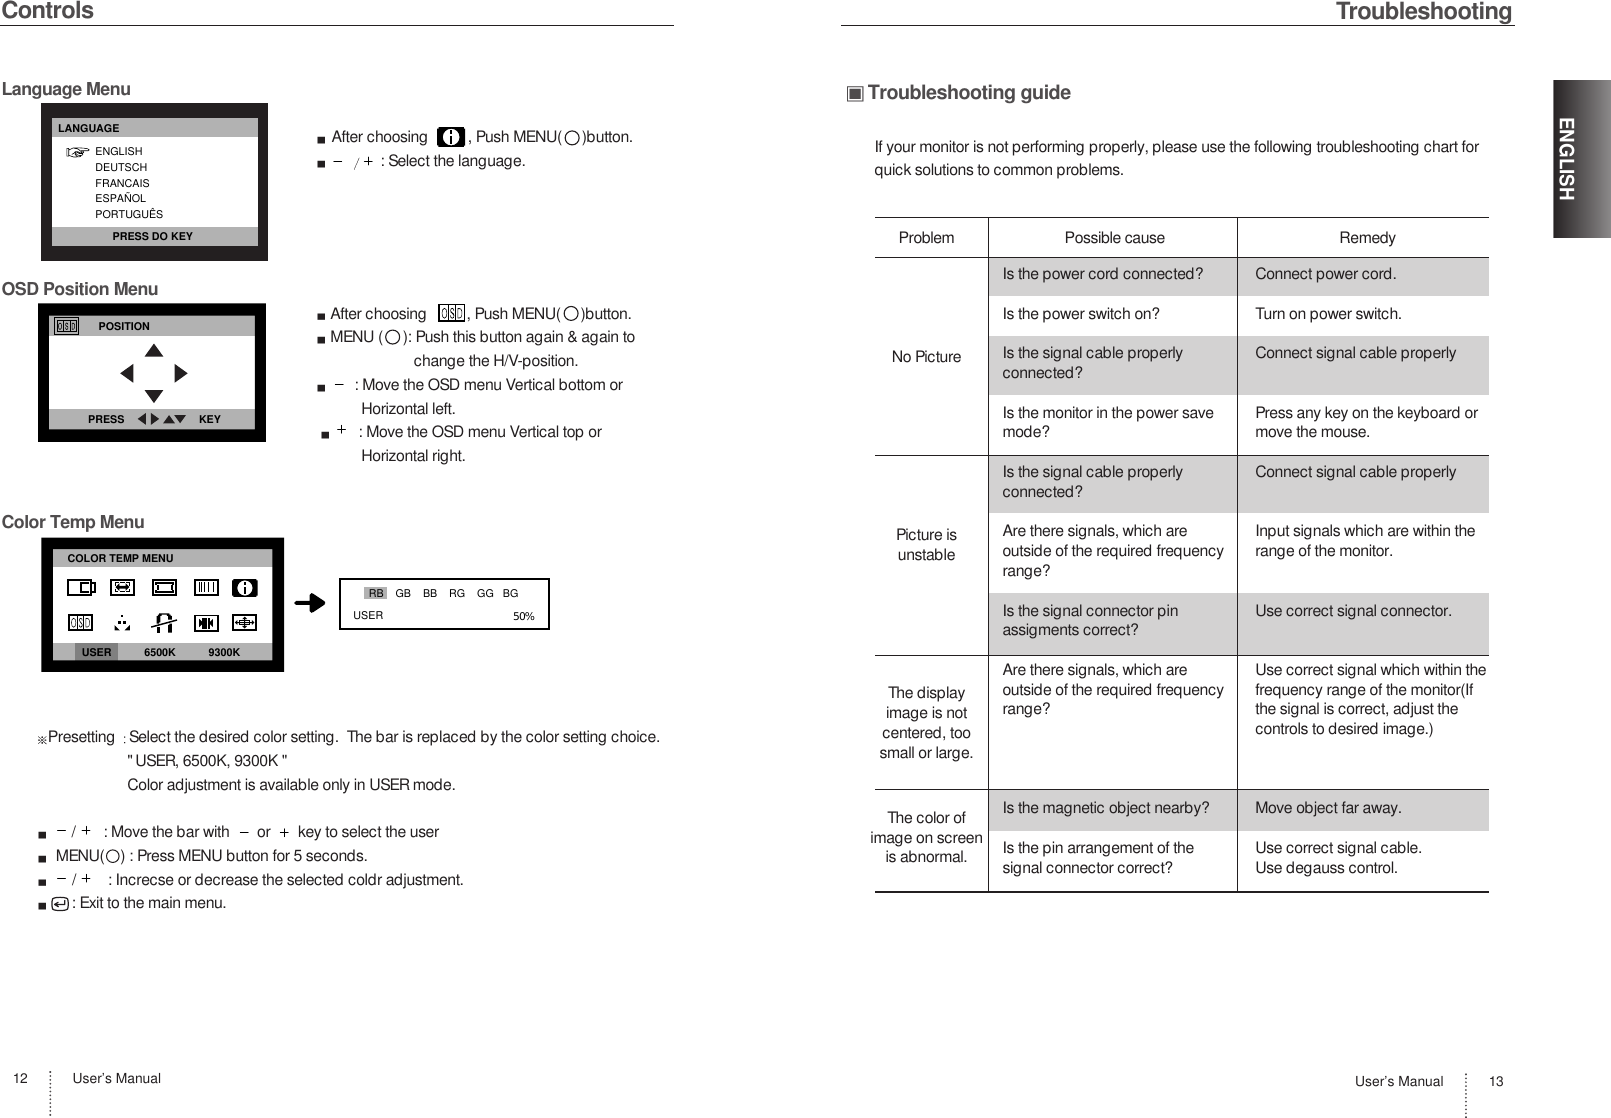 User’s Manual 13ENGLISHUser’s Manual12TroubleshootingTroubleshooting guideIf your monitor is not performing properly, please use the following troubleshooting chart forquick solutions to common problems.ControlsProblemNo PicturePicture isunstableThe displayimage is notcentered, toosmall or large.The color ofimage on screenis abnormal.Is the power cord connected?Is the power switch on?Is the signal cable properlyconnected?Is the monitor in the power savemode?Is the signal cable properly connected?Are there signals, which areoutside of the required frequencyrange?Is the signal connector pinassigments correct?Are there signals, which areoutside of the required frequencyrange?Is the magnetic object nearby?Is the pin arrangement of thesignal connector correct?Possible causeConnect power cord.Turn on power switch.Connect signal cable properly Press any key on the keyboard ormove the mouse.Connect signal cable properlyInput signals which are within therange of the monitor.Use correct signal connector.Use correct signal which within thefrequency range of the monitor(Ifthe signal is correct, adjust thecontrols to desired image.)Move object far away.Use correct signal cable.Use degauss control.RemedyLanguage MenuAfter choosing          , Push MENU(     )button.: Select the language.OSD Position Menu After choosing          , Push MENU(     )button.MENU (     ): Push this button again &amp; again to change the H/V-position.: Move the OSD menu Vertical bottom or Horizontal left.: Move the OSD menu Vertical top or Horizontal right.Color Temp MenuPresetting Select the desired color setting.  The bar is replaced by the color setting choice.&quot; USER, 6500K, 9300K &quot;Color adjustment is available only in USER mode./       : Move the bar with       or       key to select the userMENU(    ) : Press MENU button for 5 seconds./        : Increcse or decrease the selected coldr adjustment.: Exit to the main menu.50%RB    GB    BB    RG    GG   BGUSERCOLOR TEMP MENUUSER           6500K           9300KLANGUAGEENGLISHDEUTSCHFRANCAISESPAÑOLPORTUGUÊSPRESS DO KEYPOSITIONPRESS                         KEY